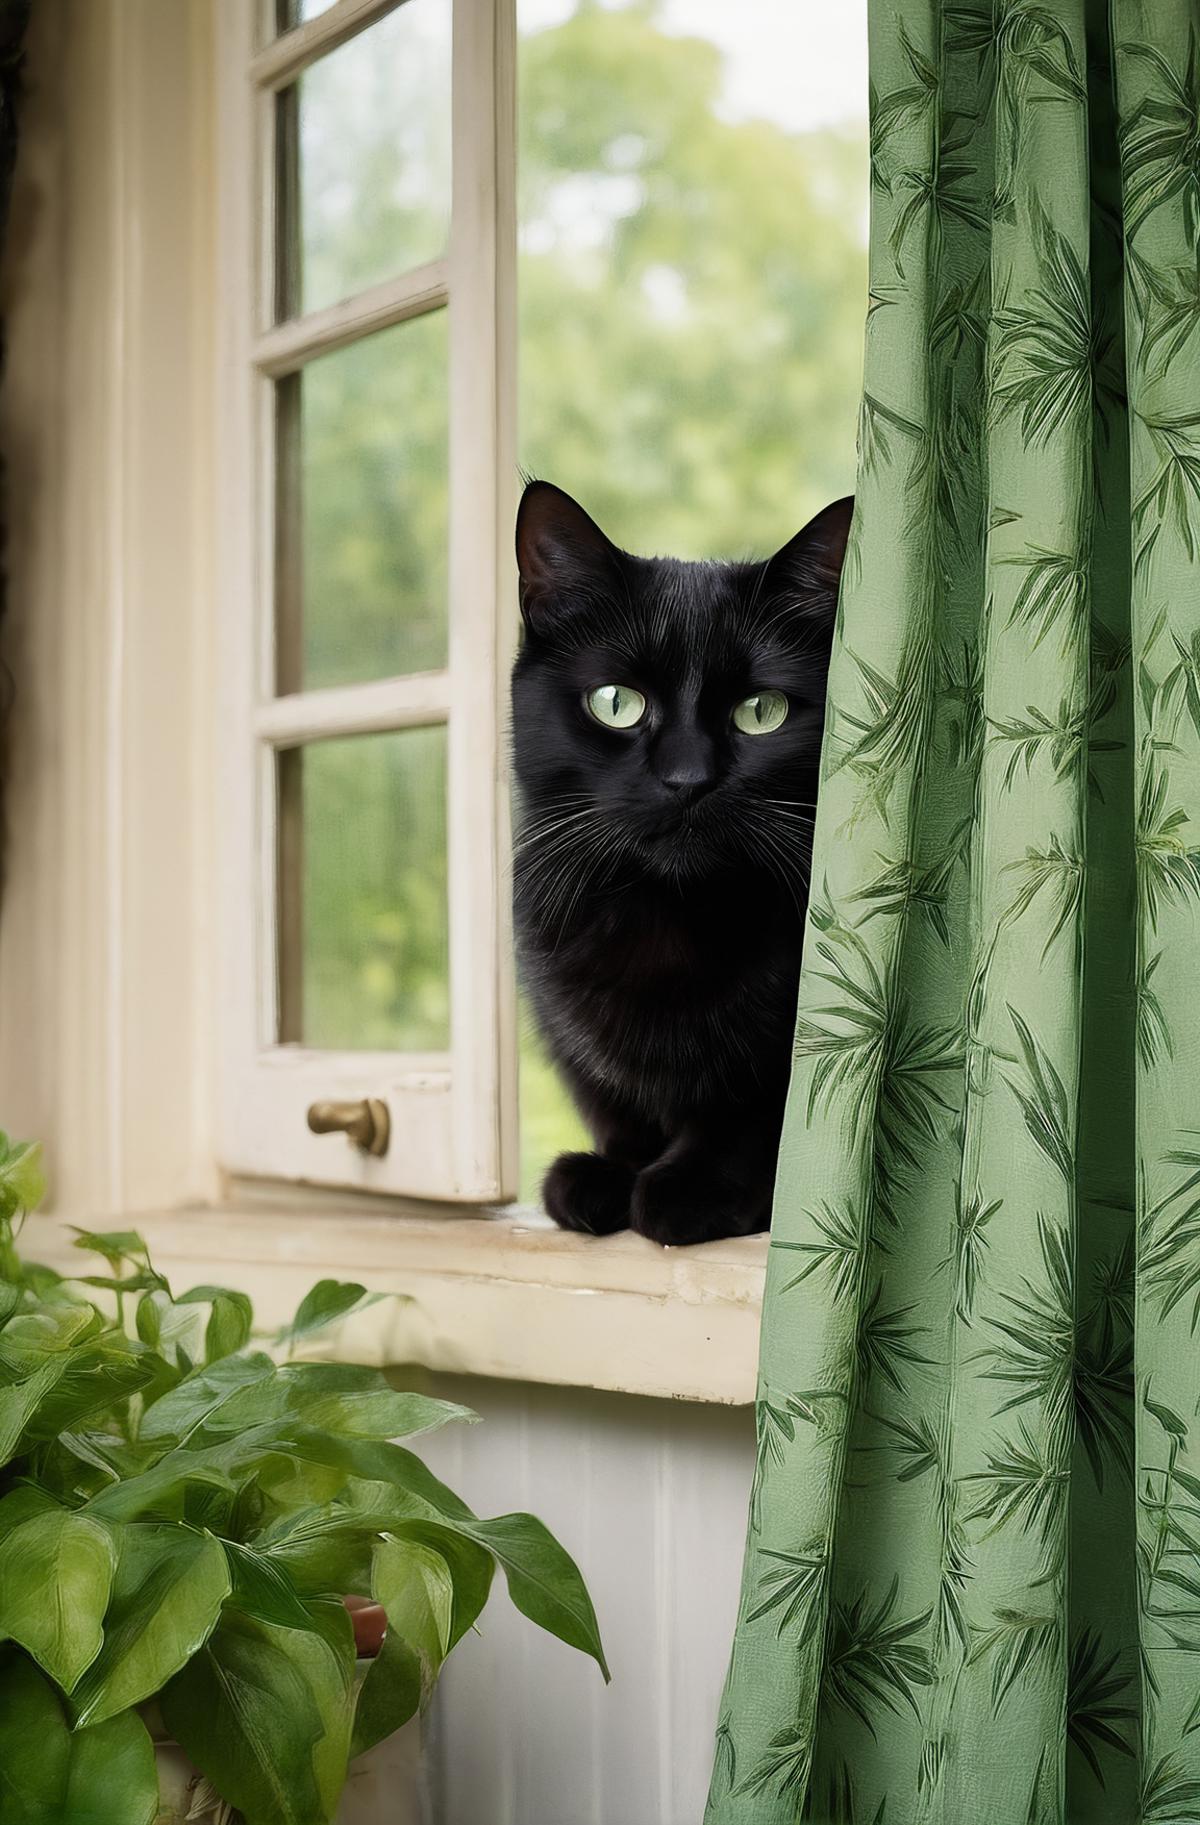 A black cat with green eyes looking out the window.